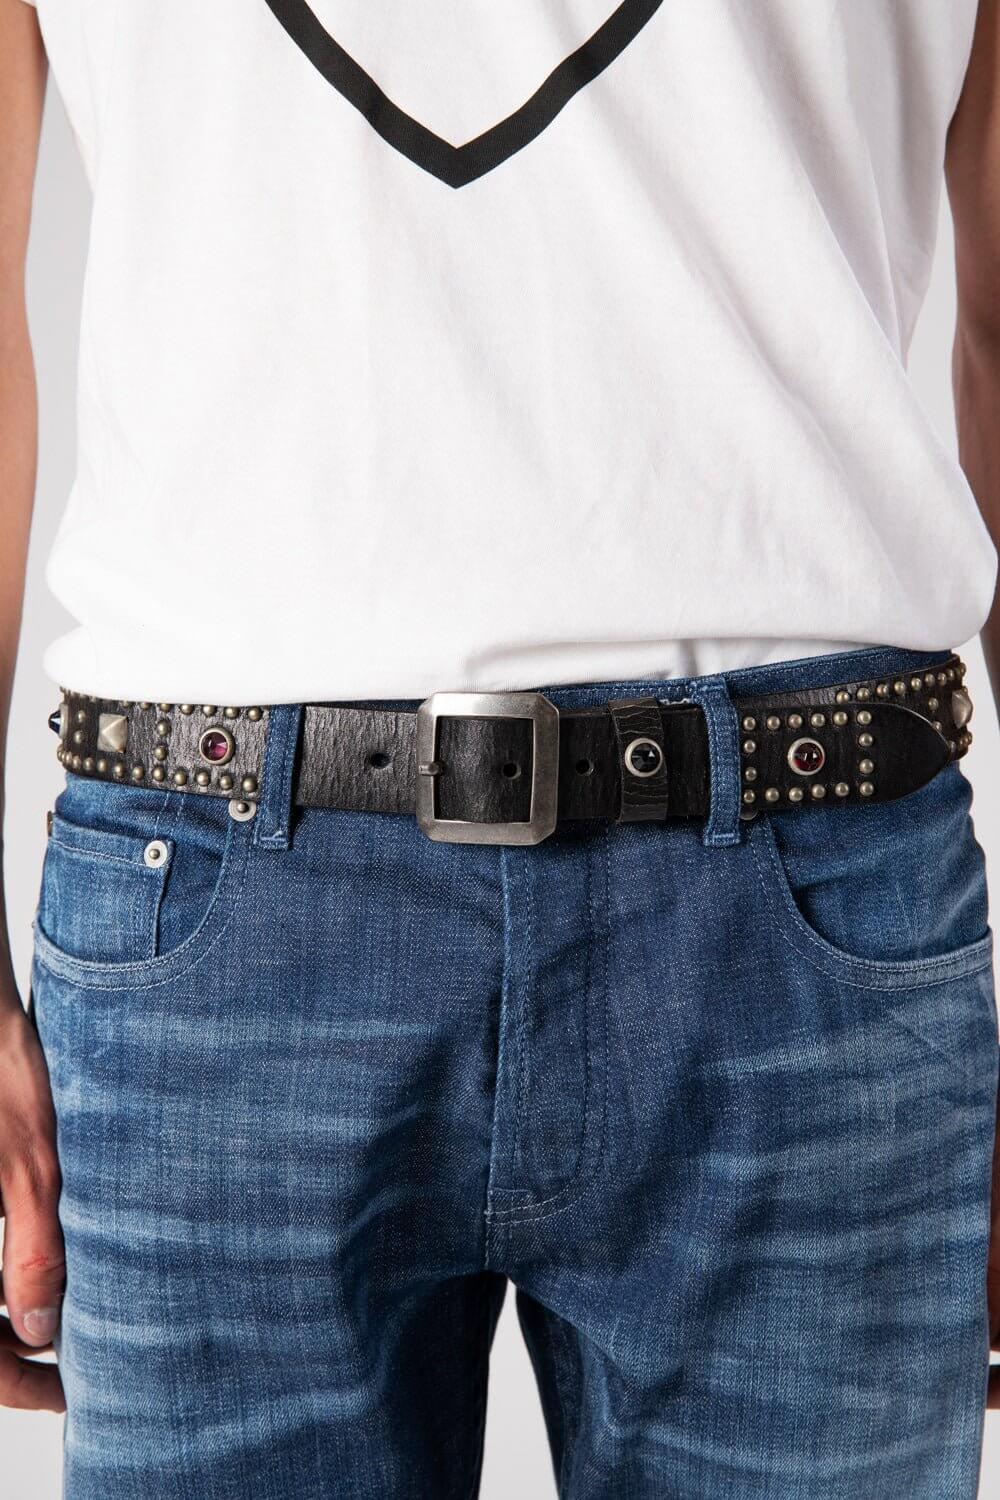 TROUBADOUR BELT Leather belt with studs and glass stones. Brass buckle. 3,5 cm height. HTC LOS ANGELES